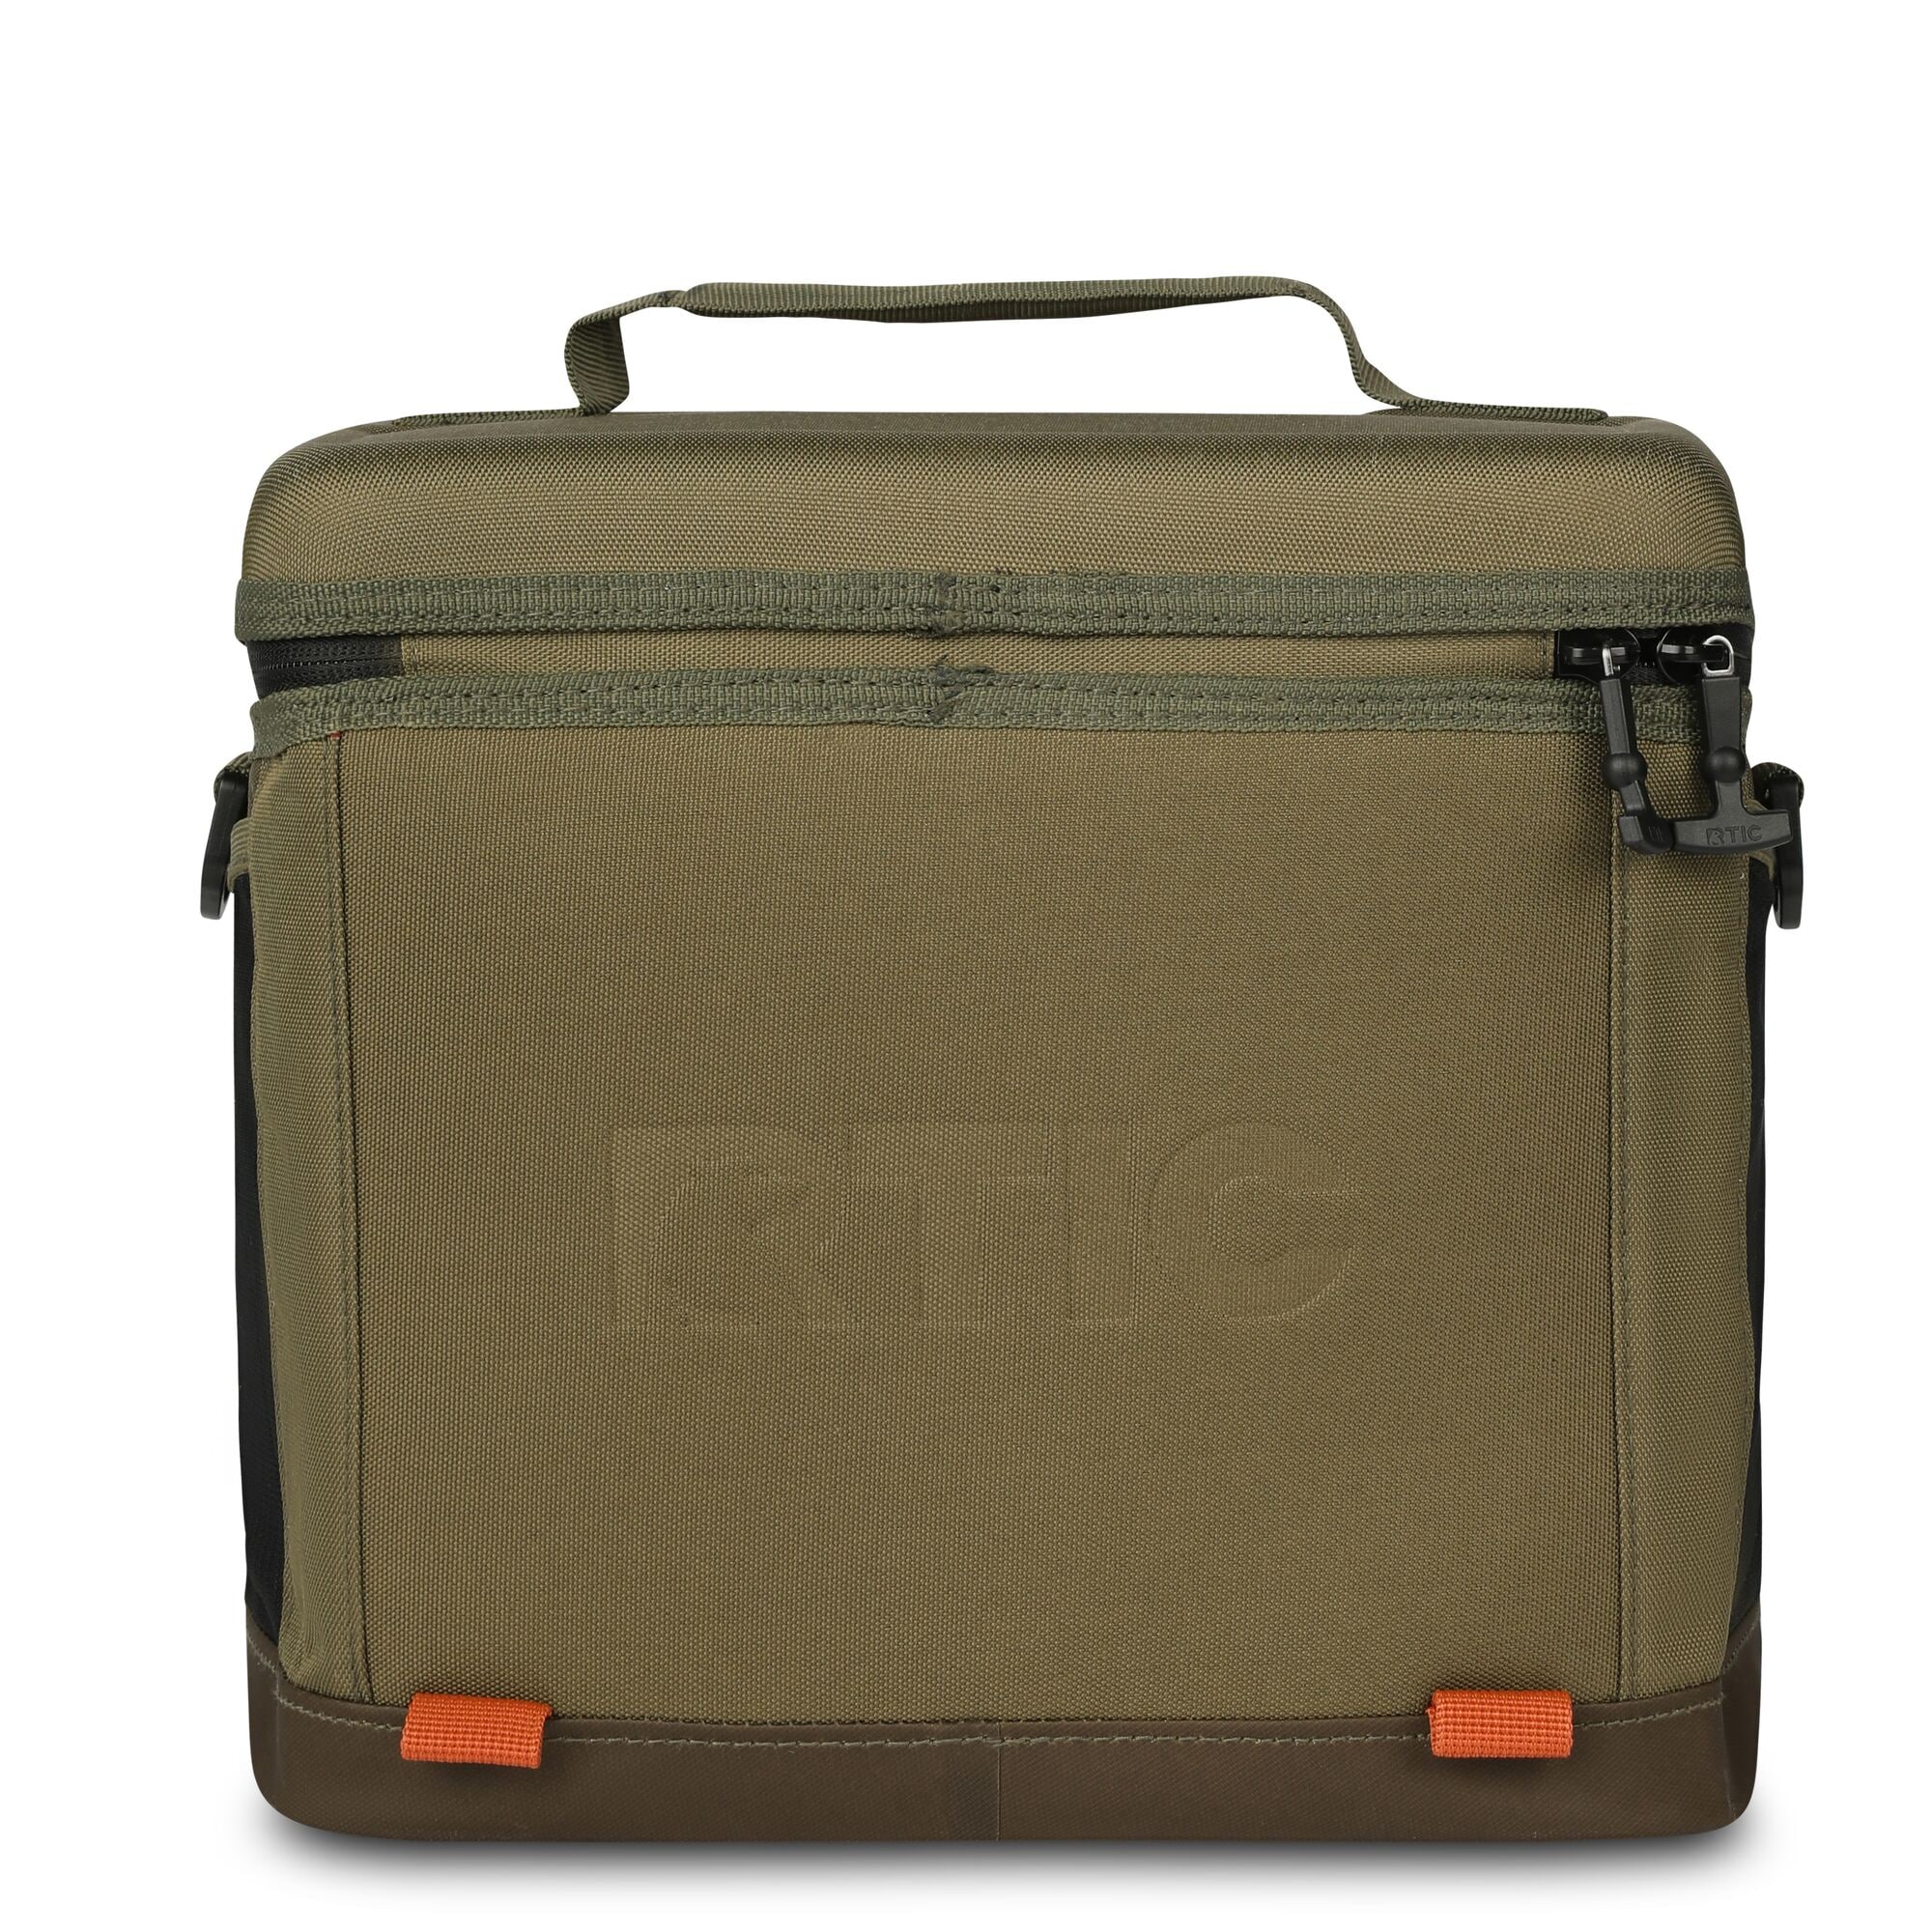  RTIC 6 Can Everyday Cooler, Soft Sided Portable